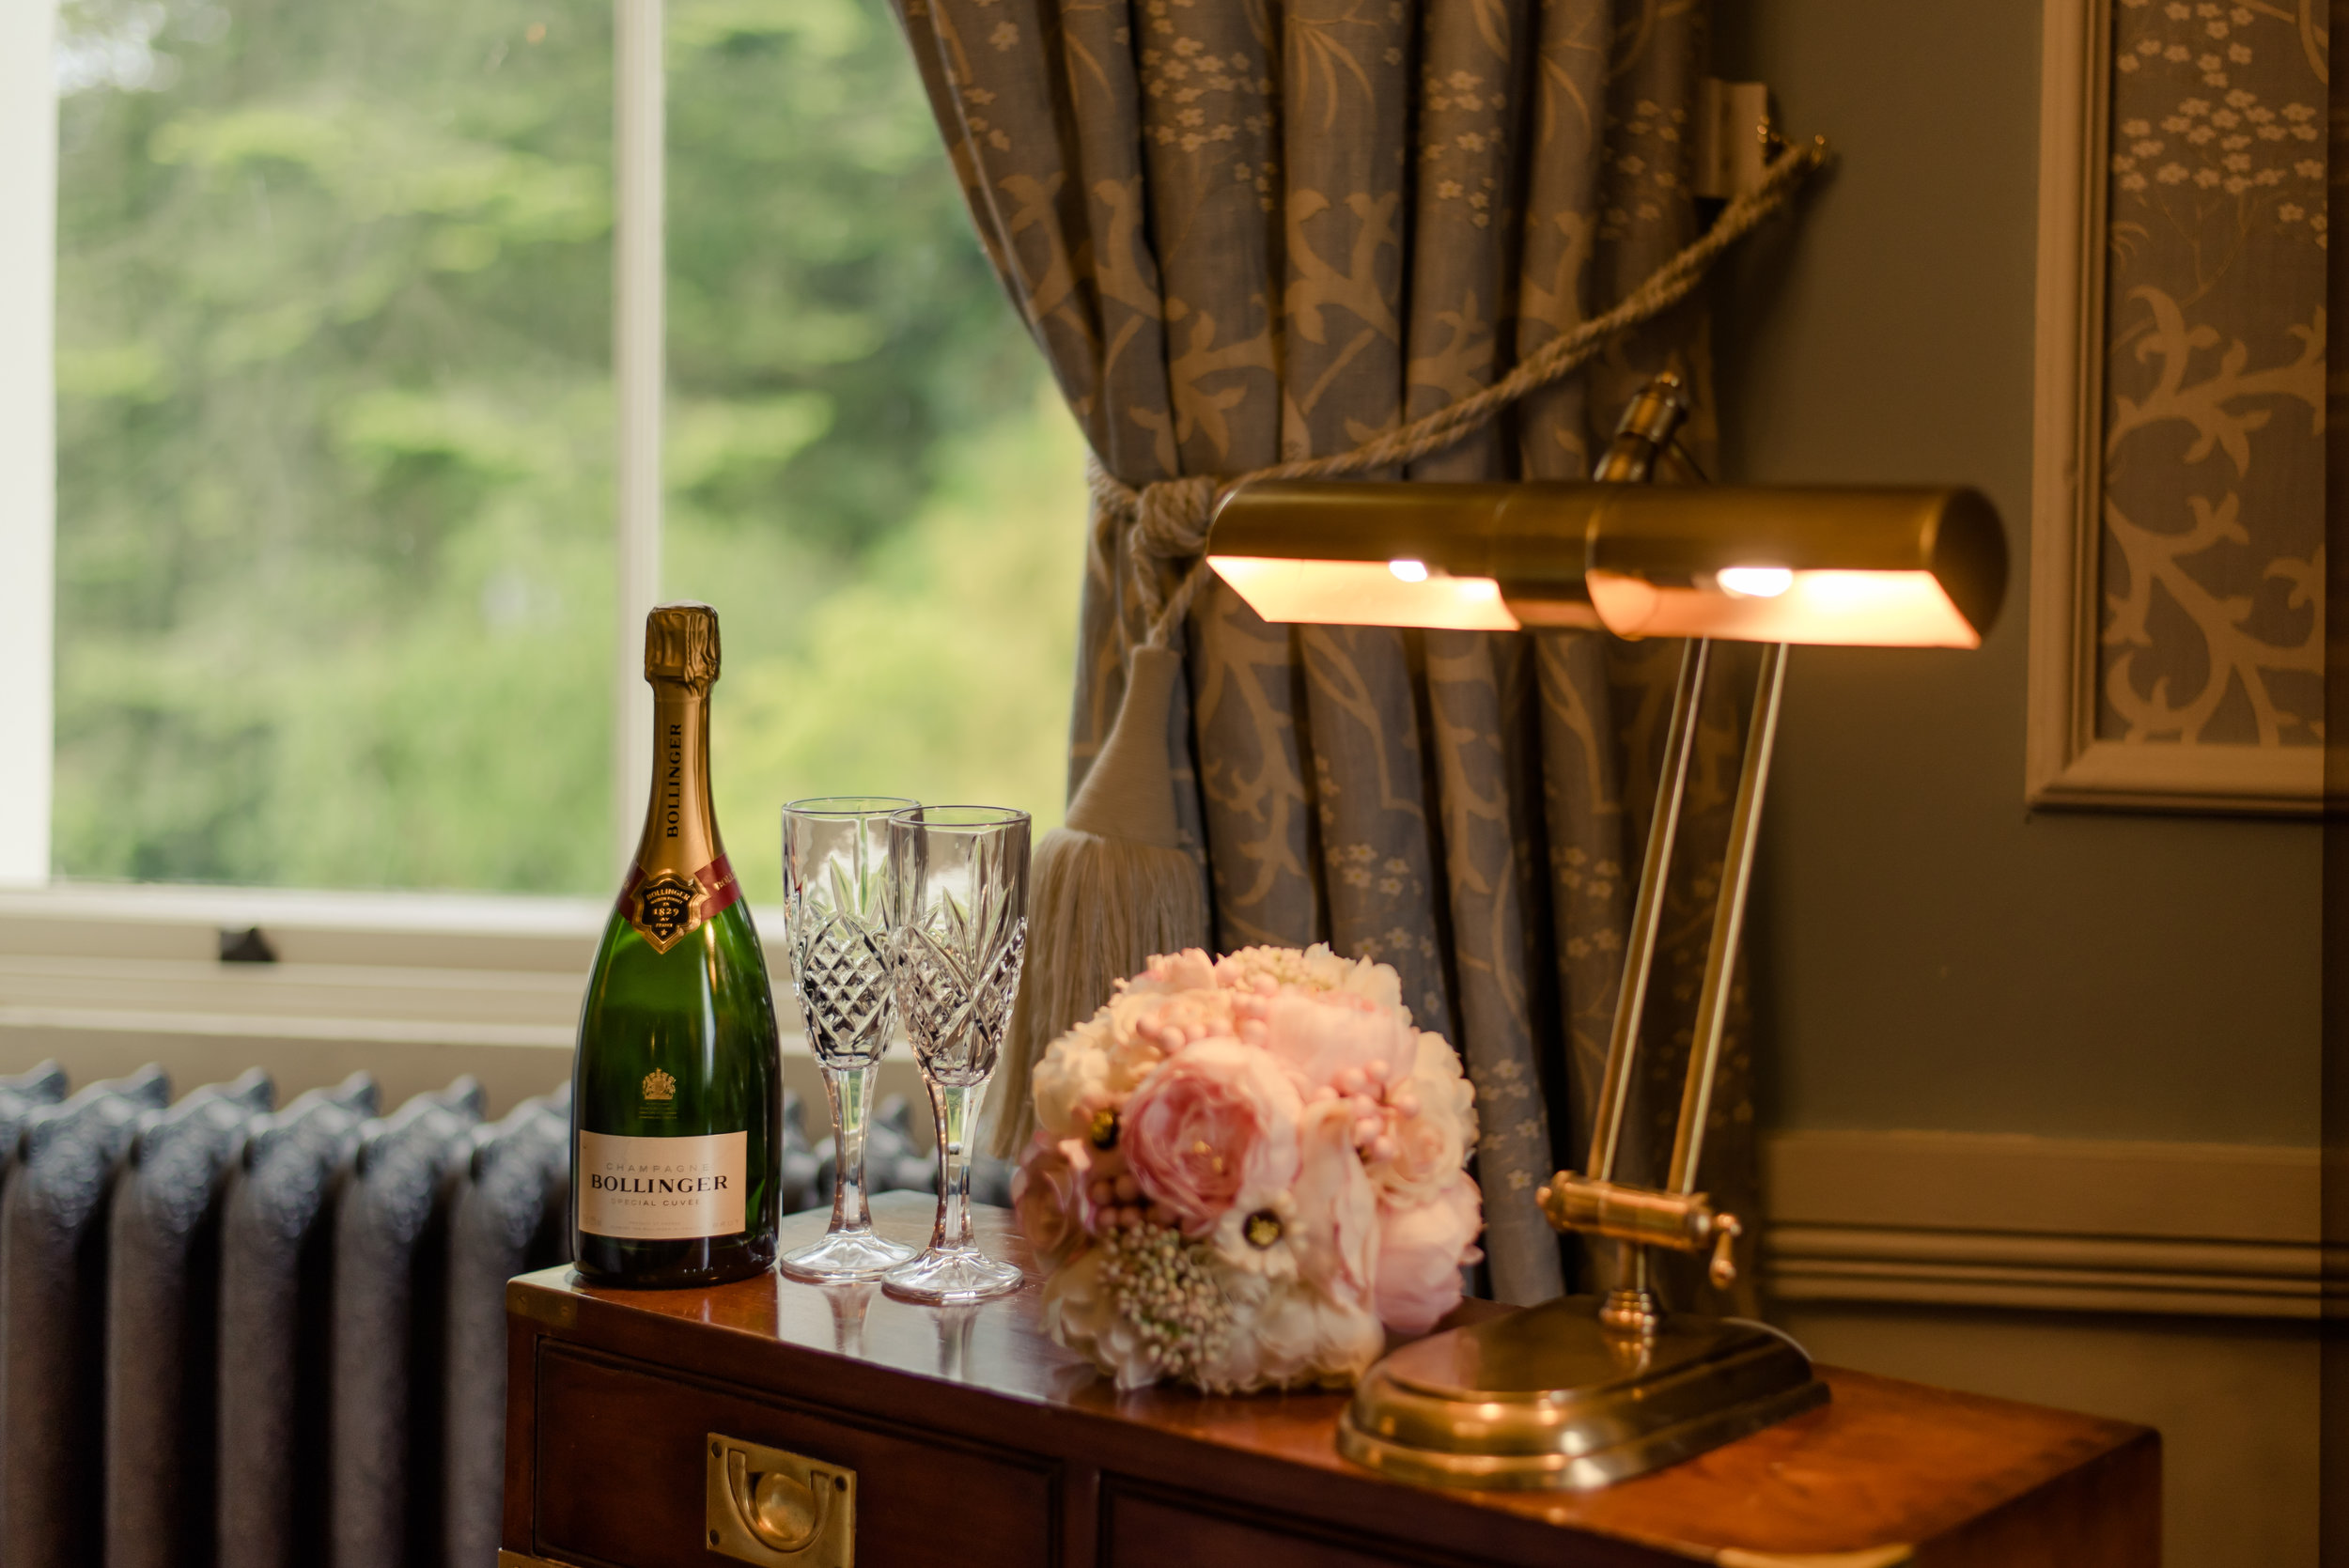 Tulfarris Hotel & Golf Resort briday suite with flowers and champagne.jpg